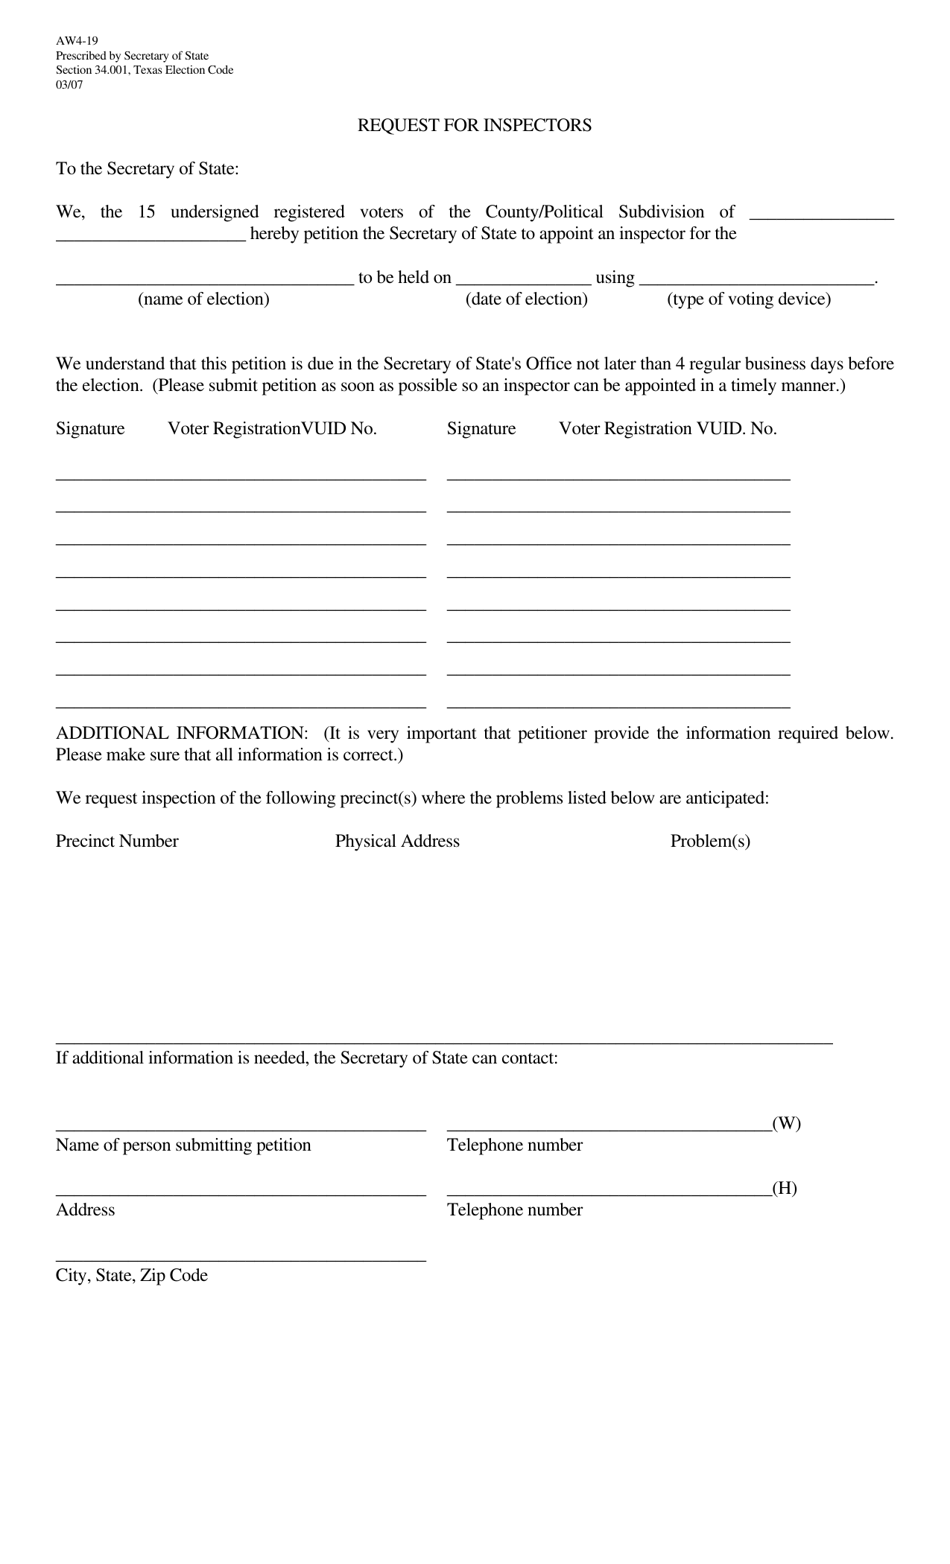 Form AW4-19 Request for Inspectors - Texas (English / Spanish), Page 1